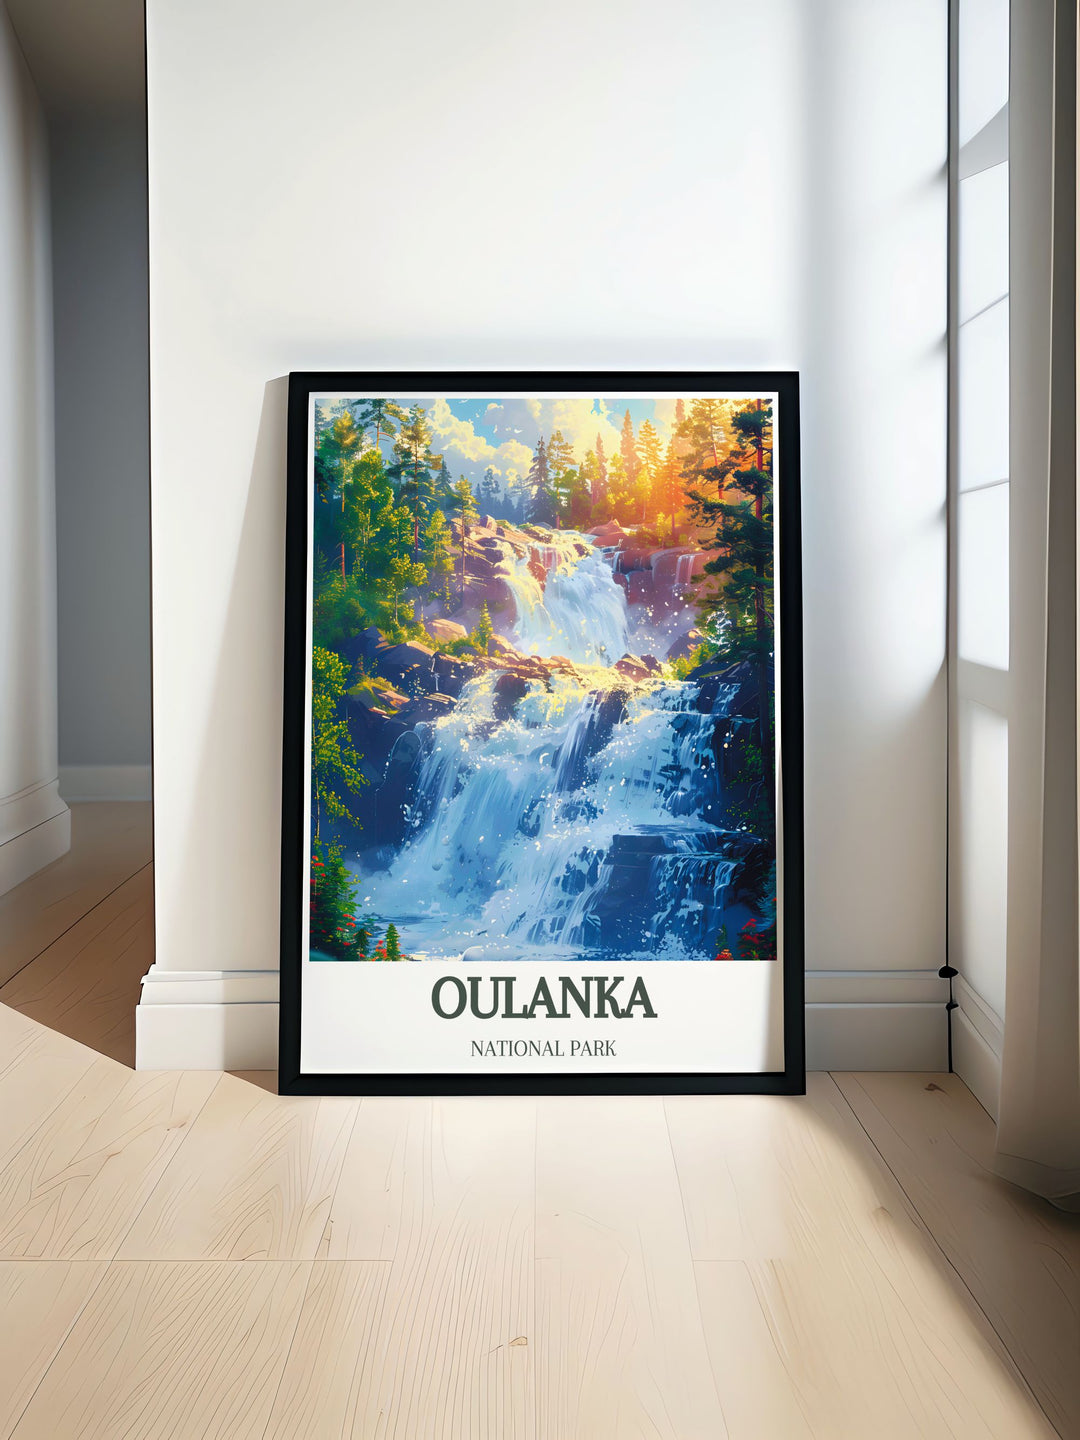 Finland Travel Print featuring Kiutakongas Rapids in Oulanka National Park capturing the vibrant colors and natural beauty of the rapids perfect for nature enthusiasts and adventurers looking to bring a piece of Scandinavian wilderness into their home decor